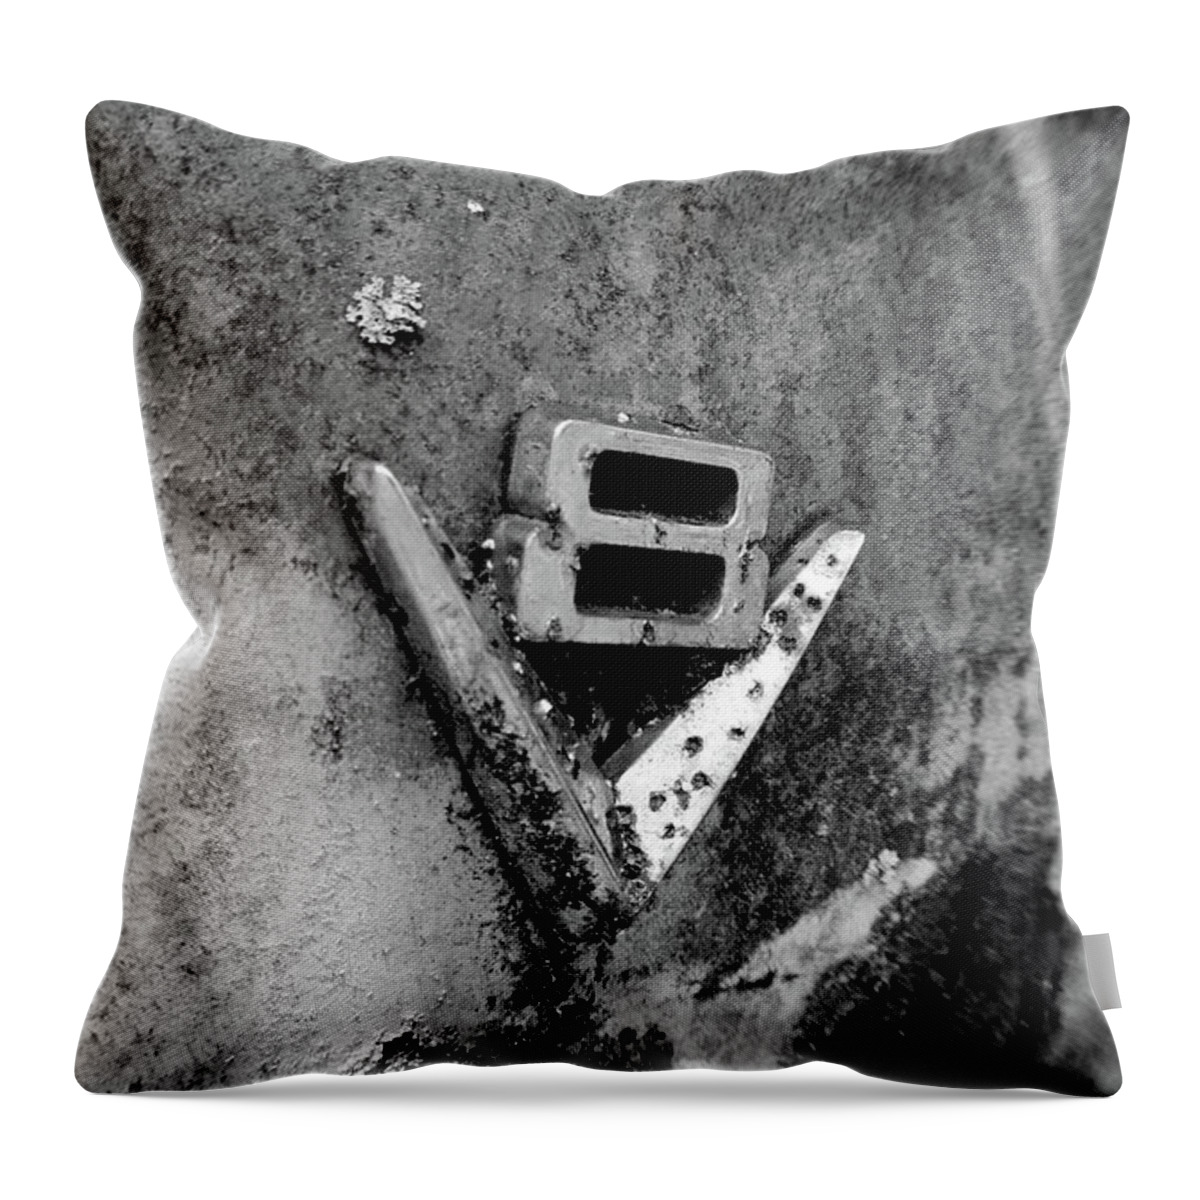 V8 Throw Pillow featuring the photograph V8 Emblem by Matthew Mezo